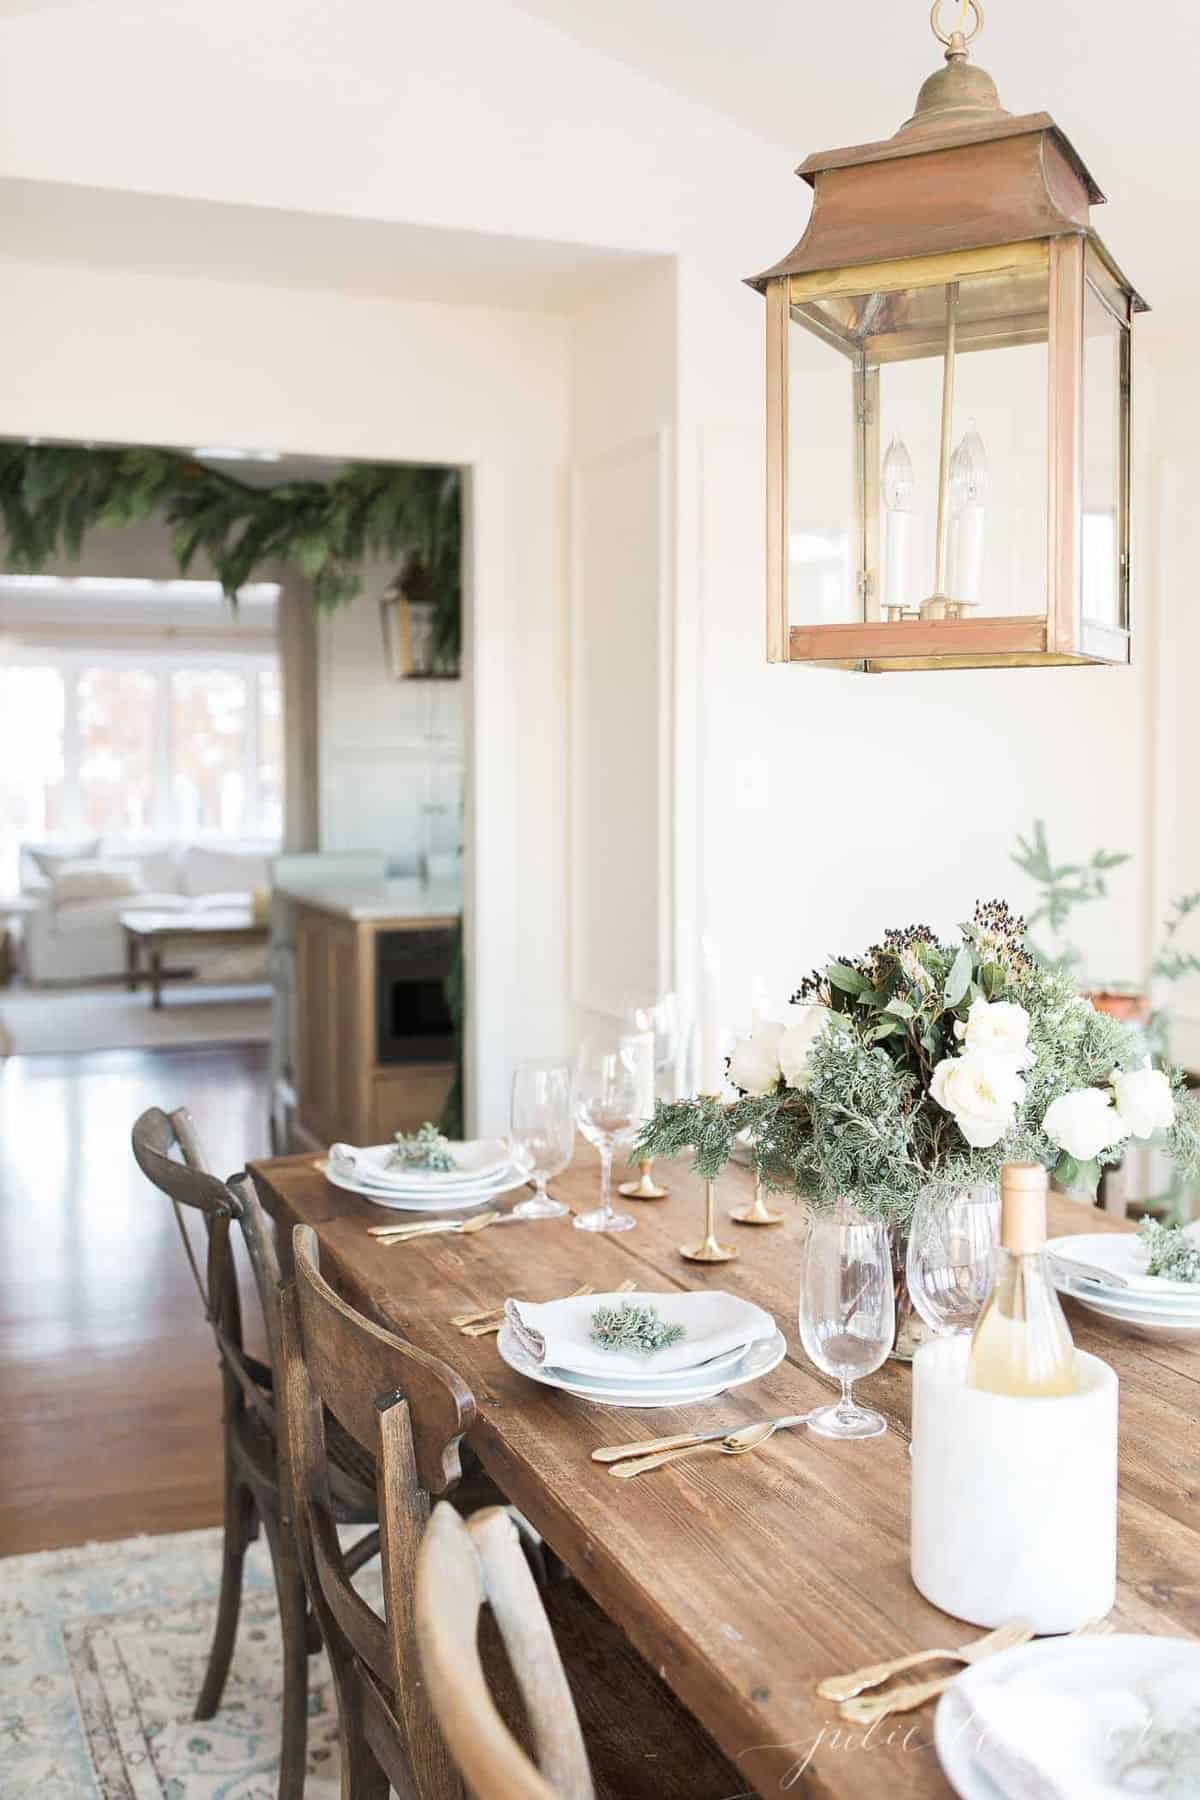 Dining room with wooden table and chairs set with a blue christmas table setting.